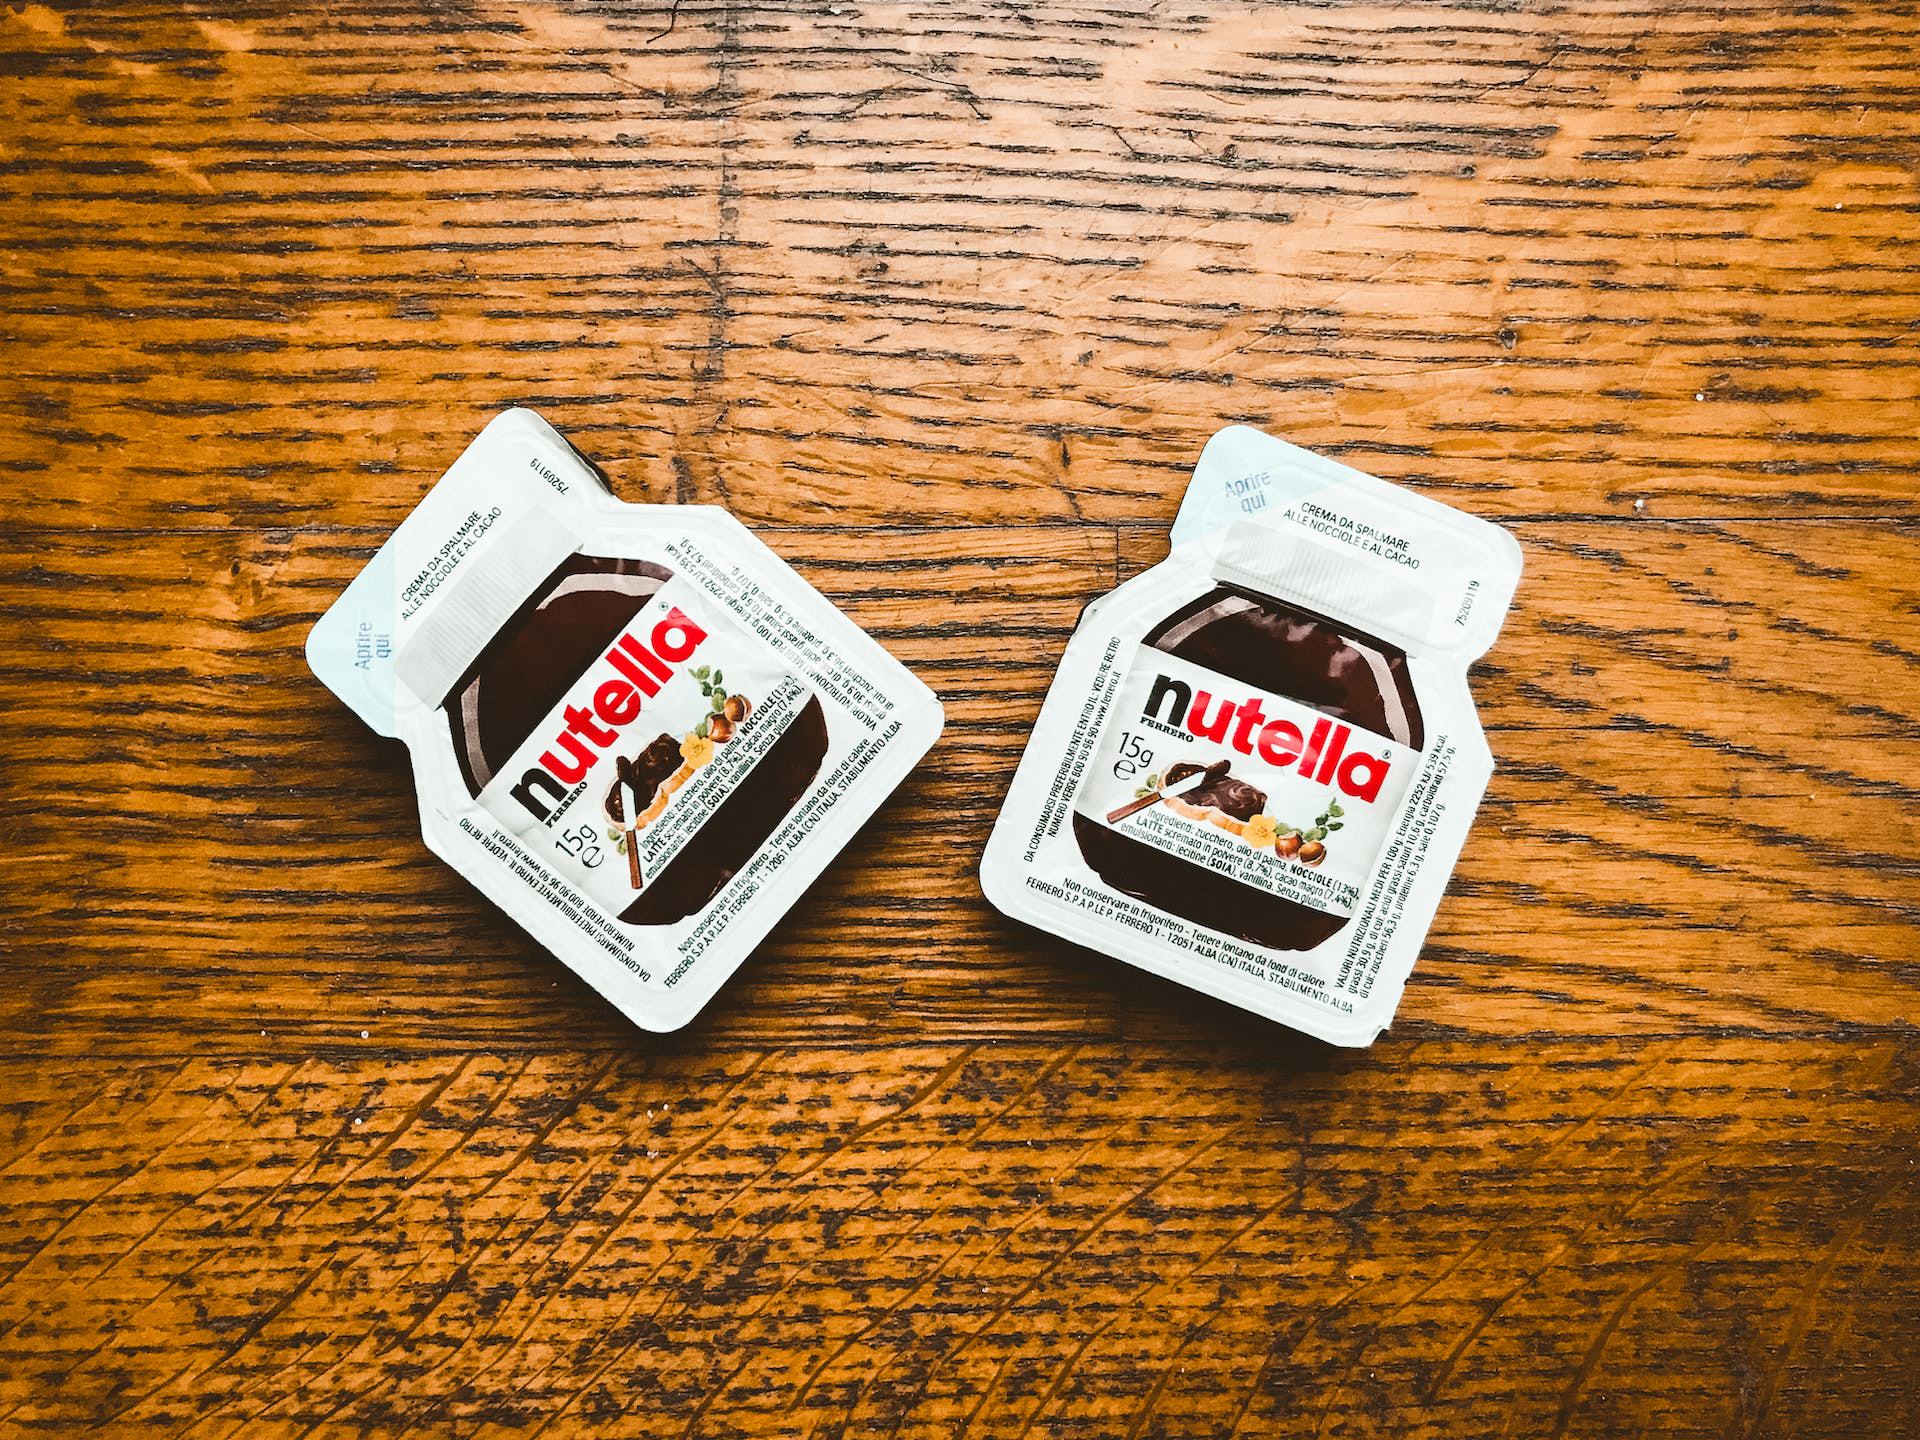 Can you take Nutella on a plane? Travel-size Nutella packets.